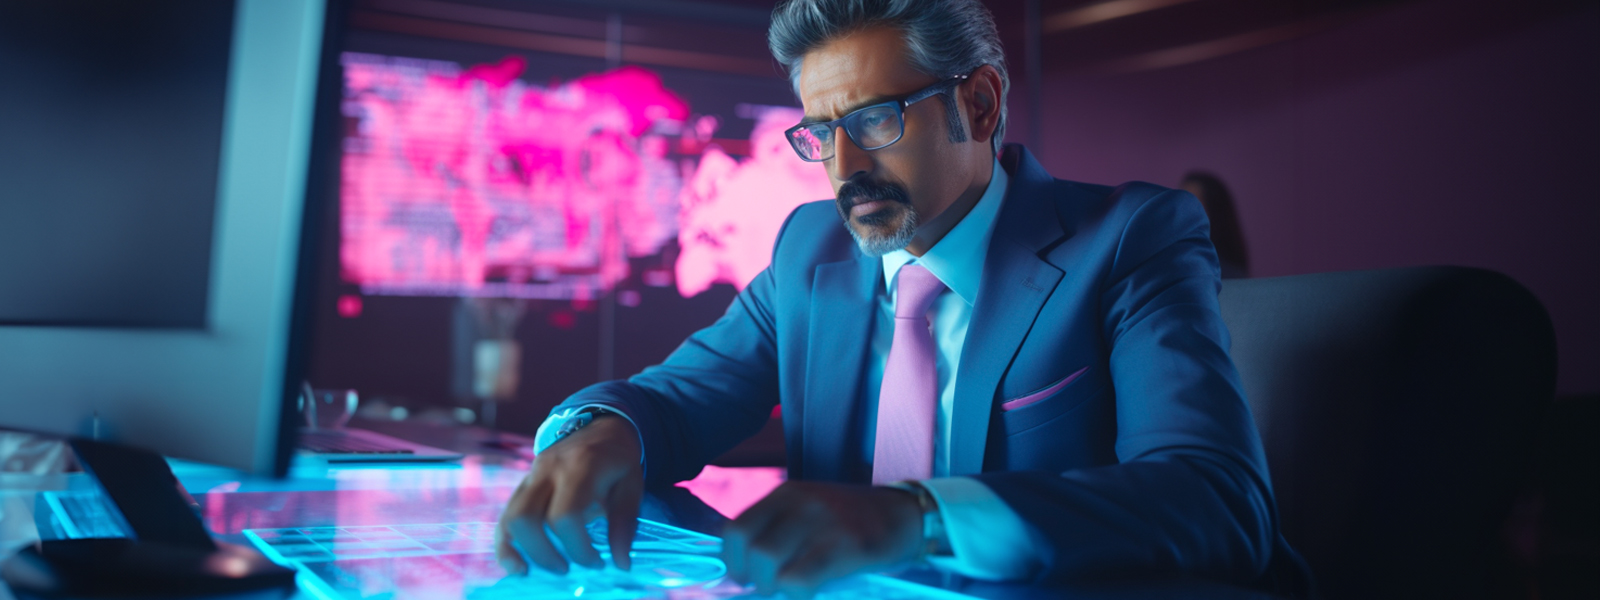 Stylish businessman with glasses working on a futuristic holographic interface at his desk.